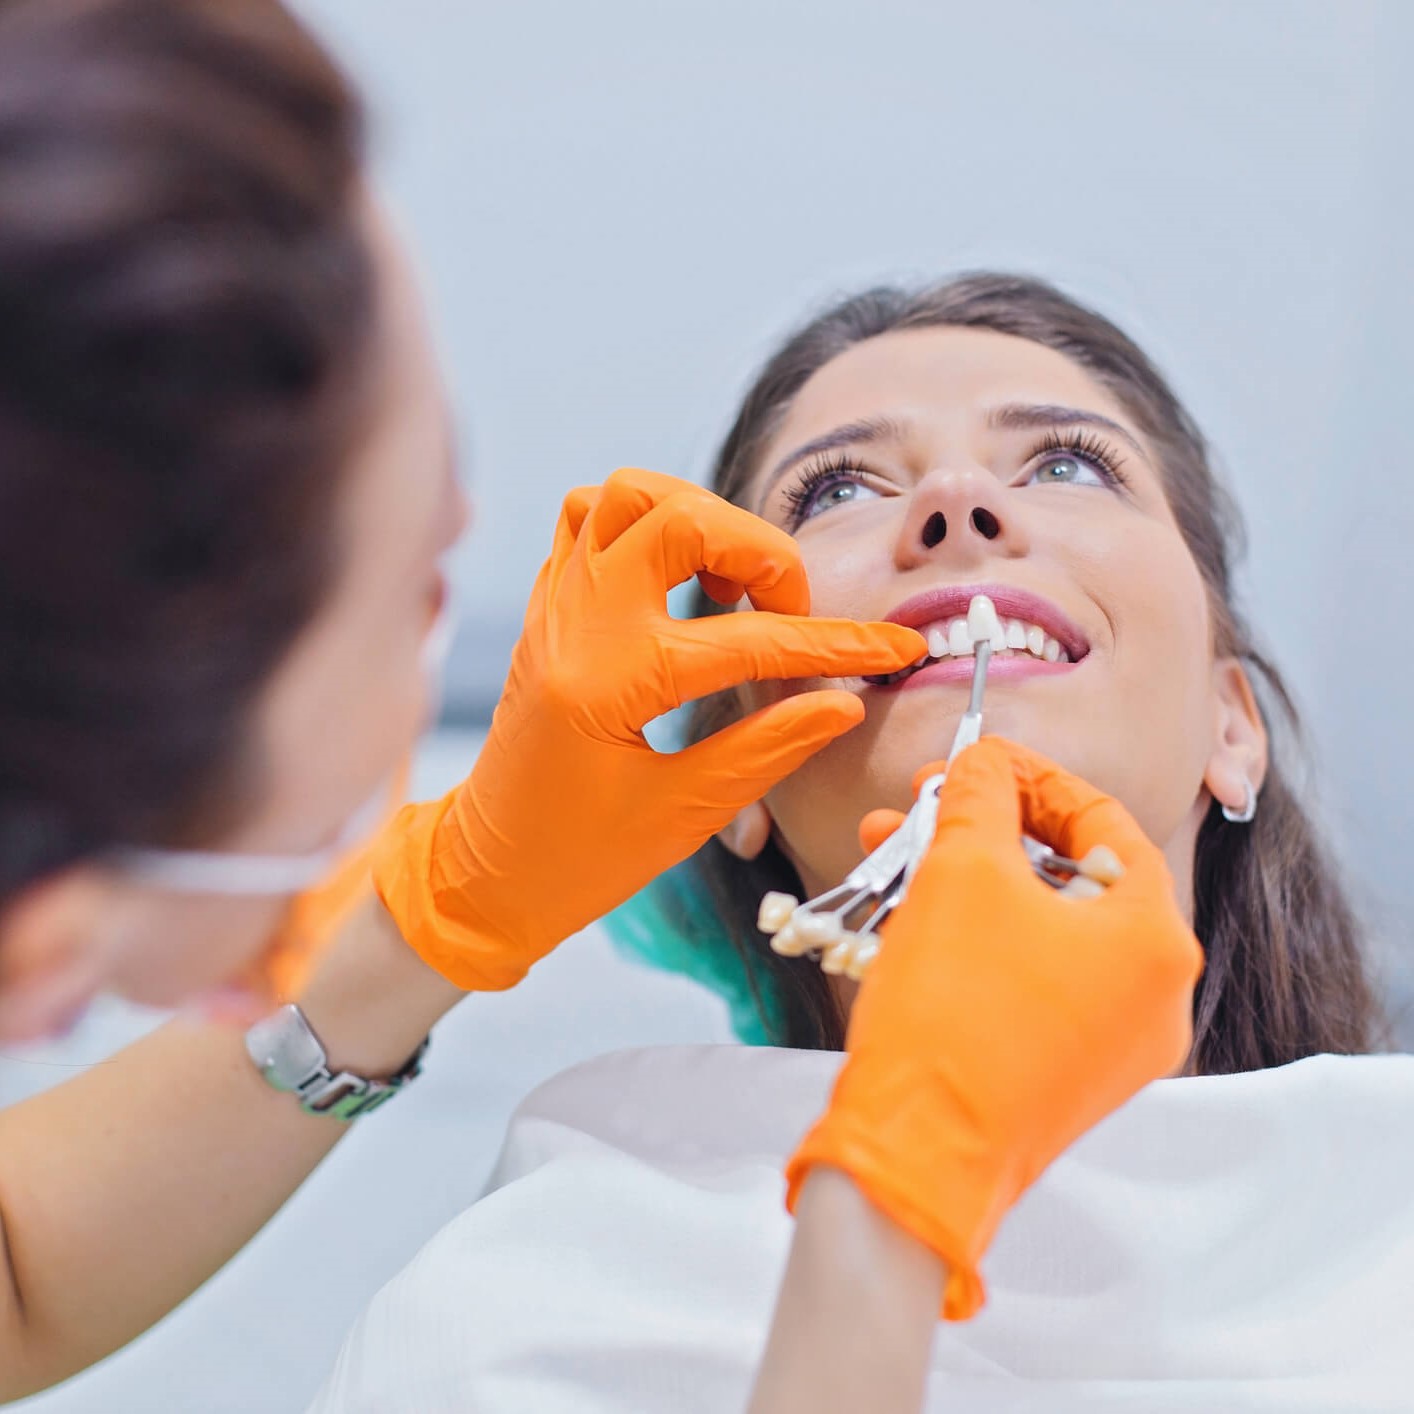 only $19 for all new patients at Gateway Dental of North Miami Beach